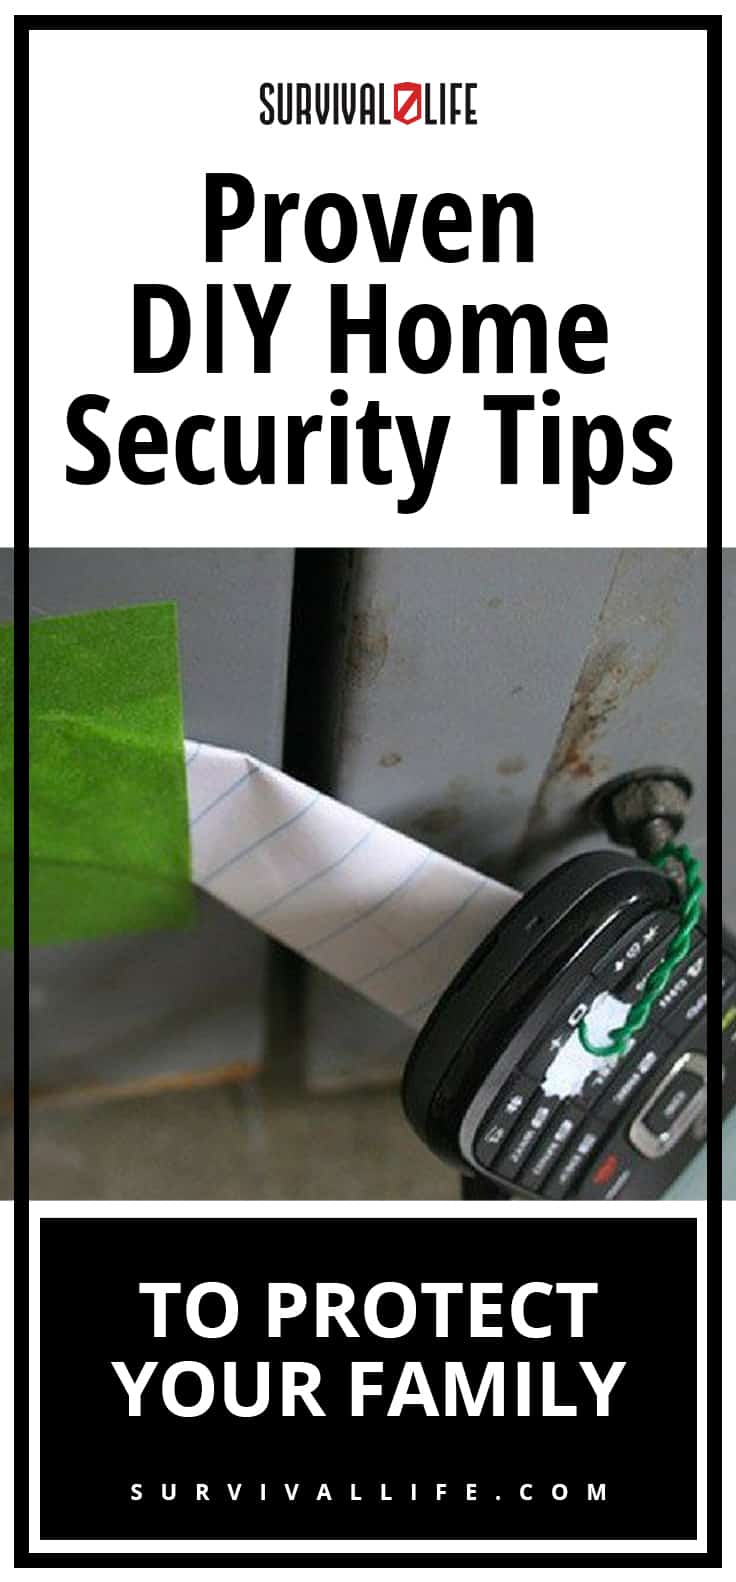 DIY Home Security | Proven DIY Home Security Tips to Protect Your Family